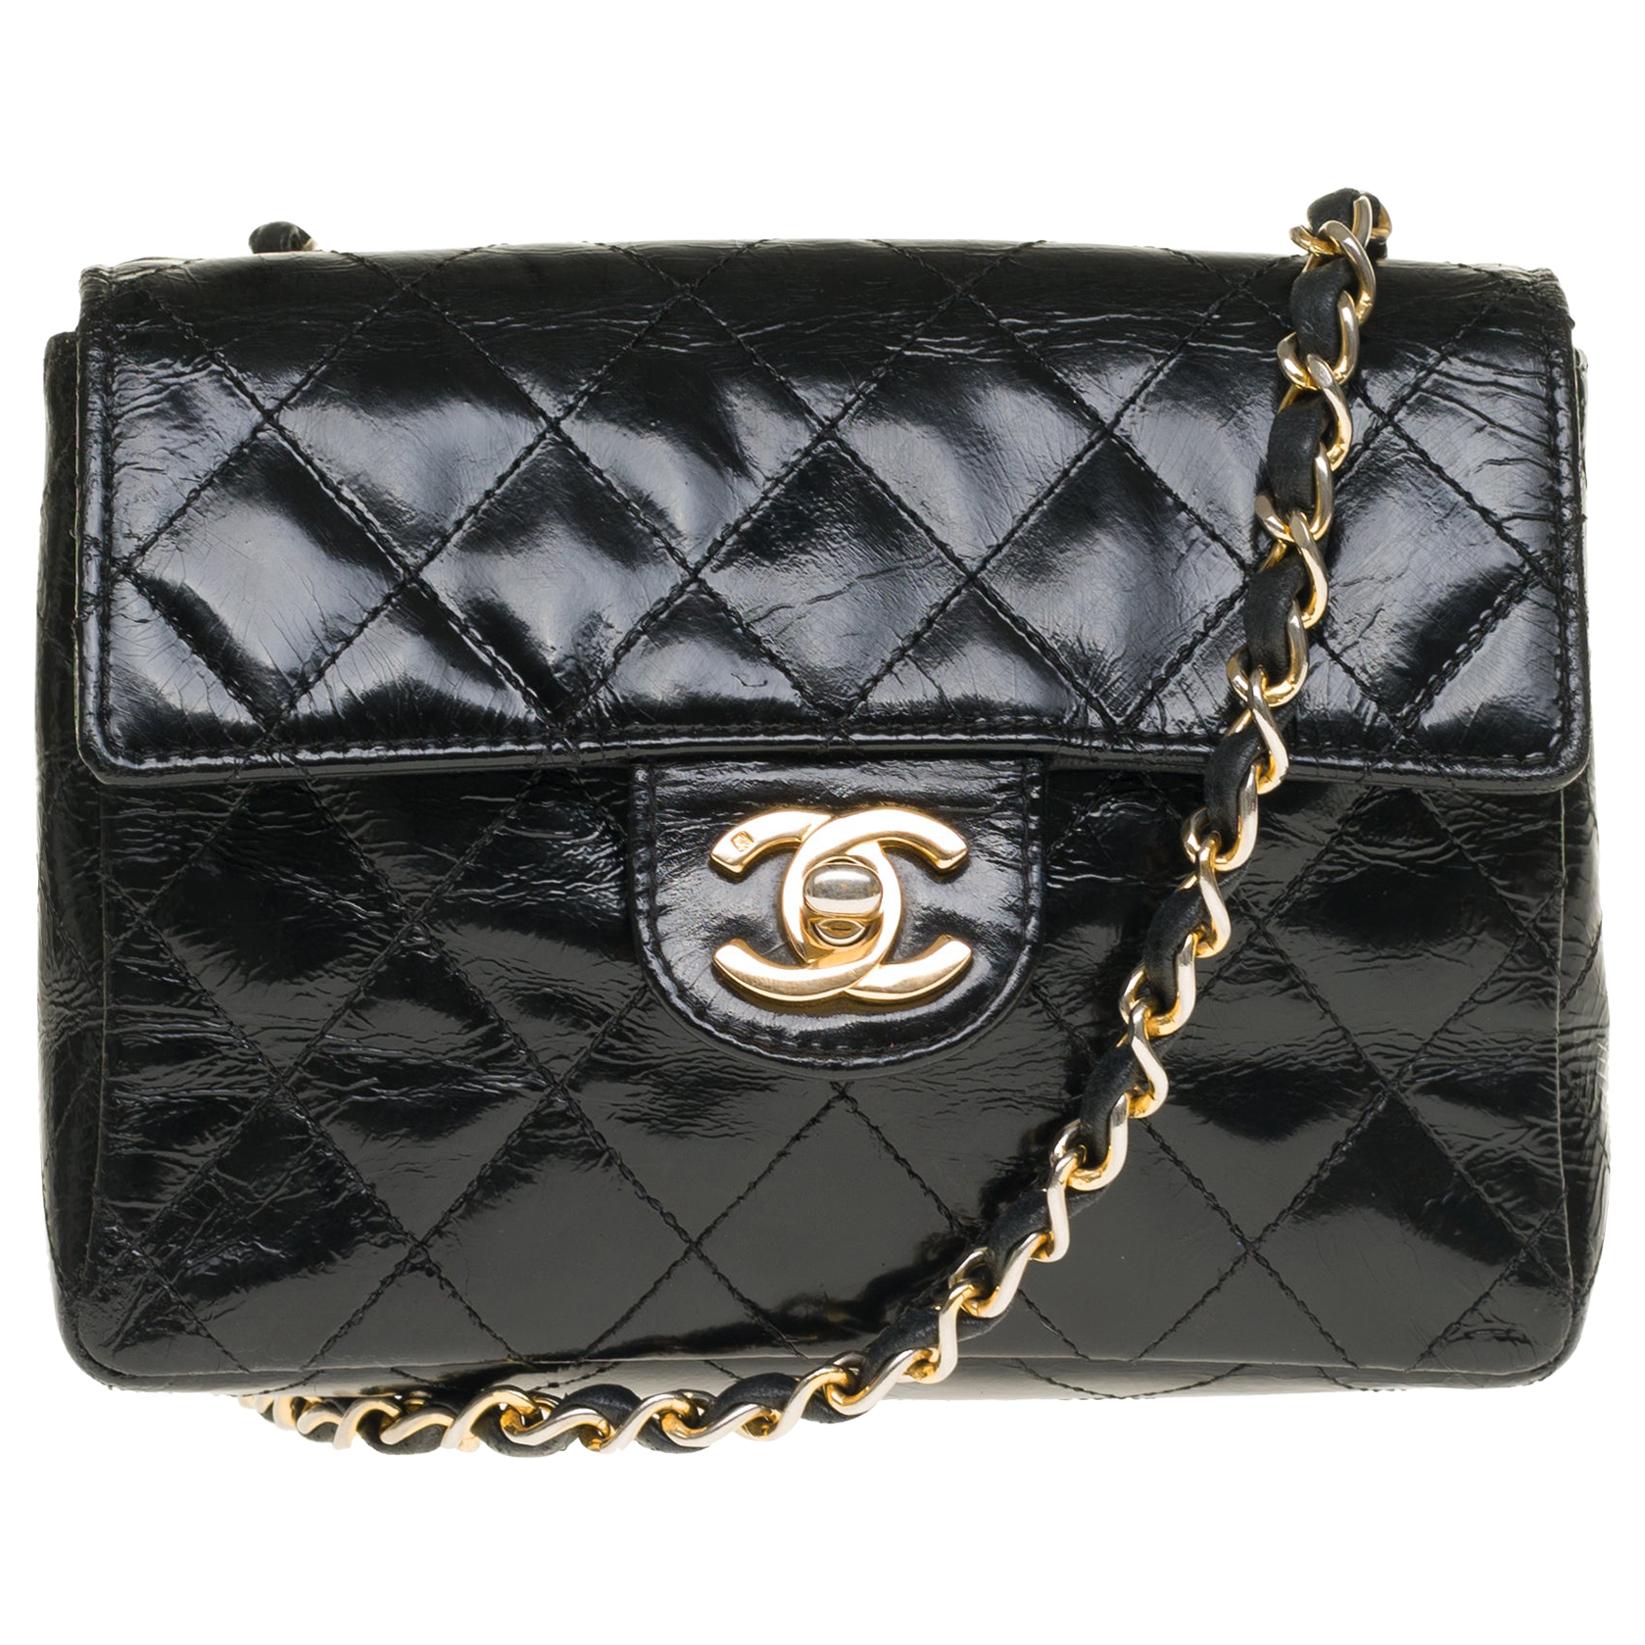 Chanel Mini square handbag in black quilted patent leather, gold hardware